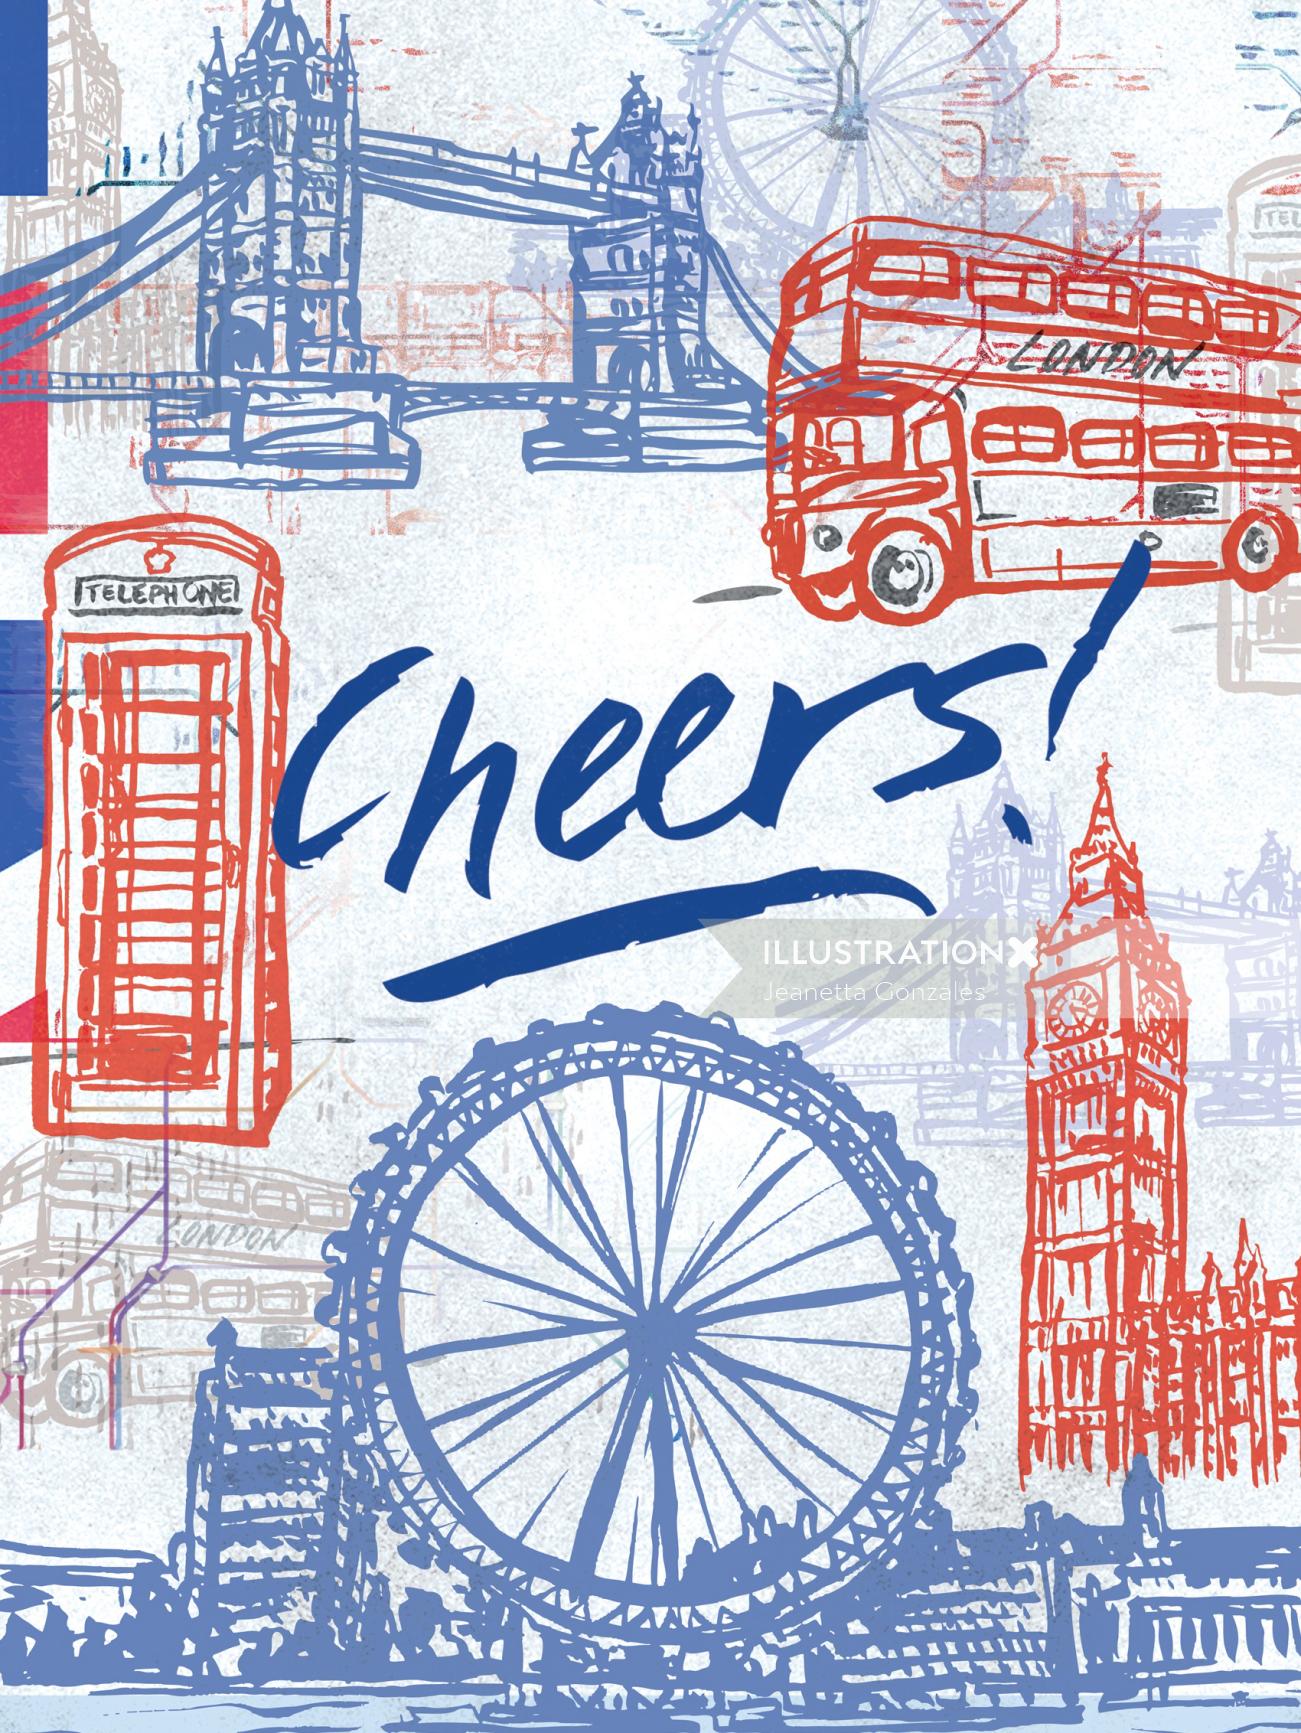 Hand lettering art of cheers